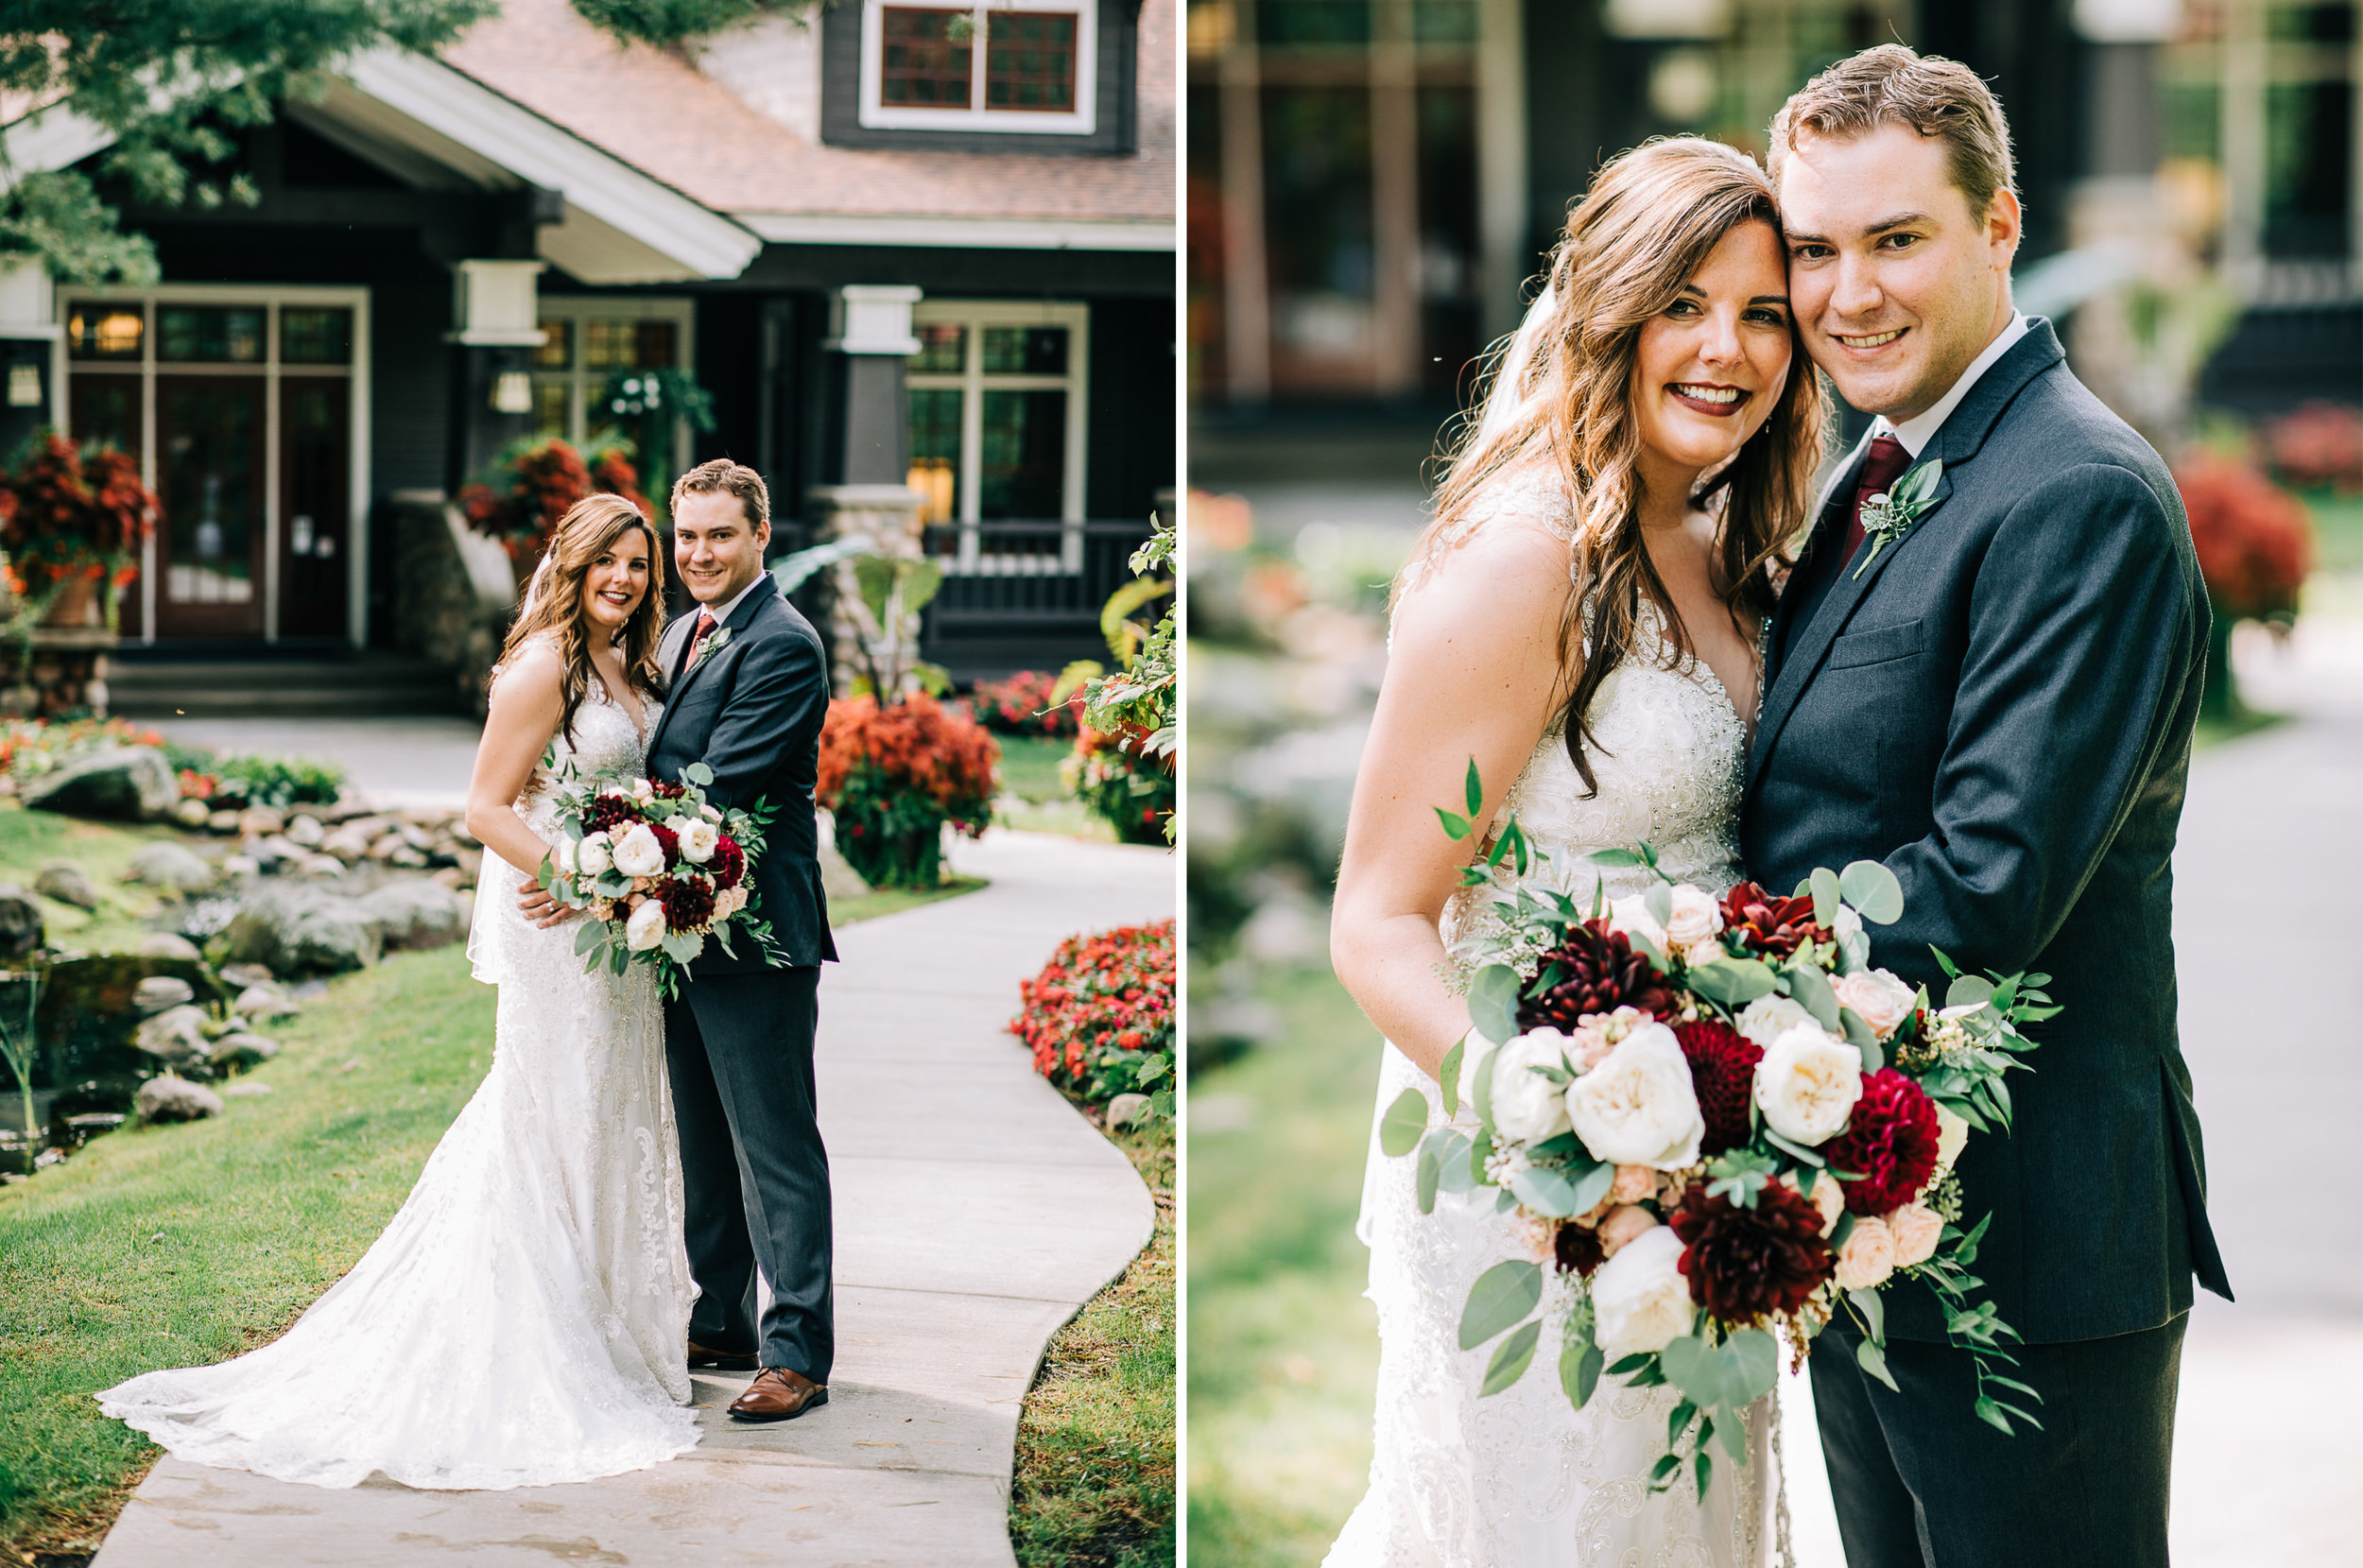 Grand View Lodge wedding images in Brainerd, MN 